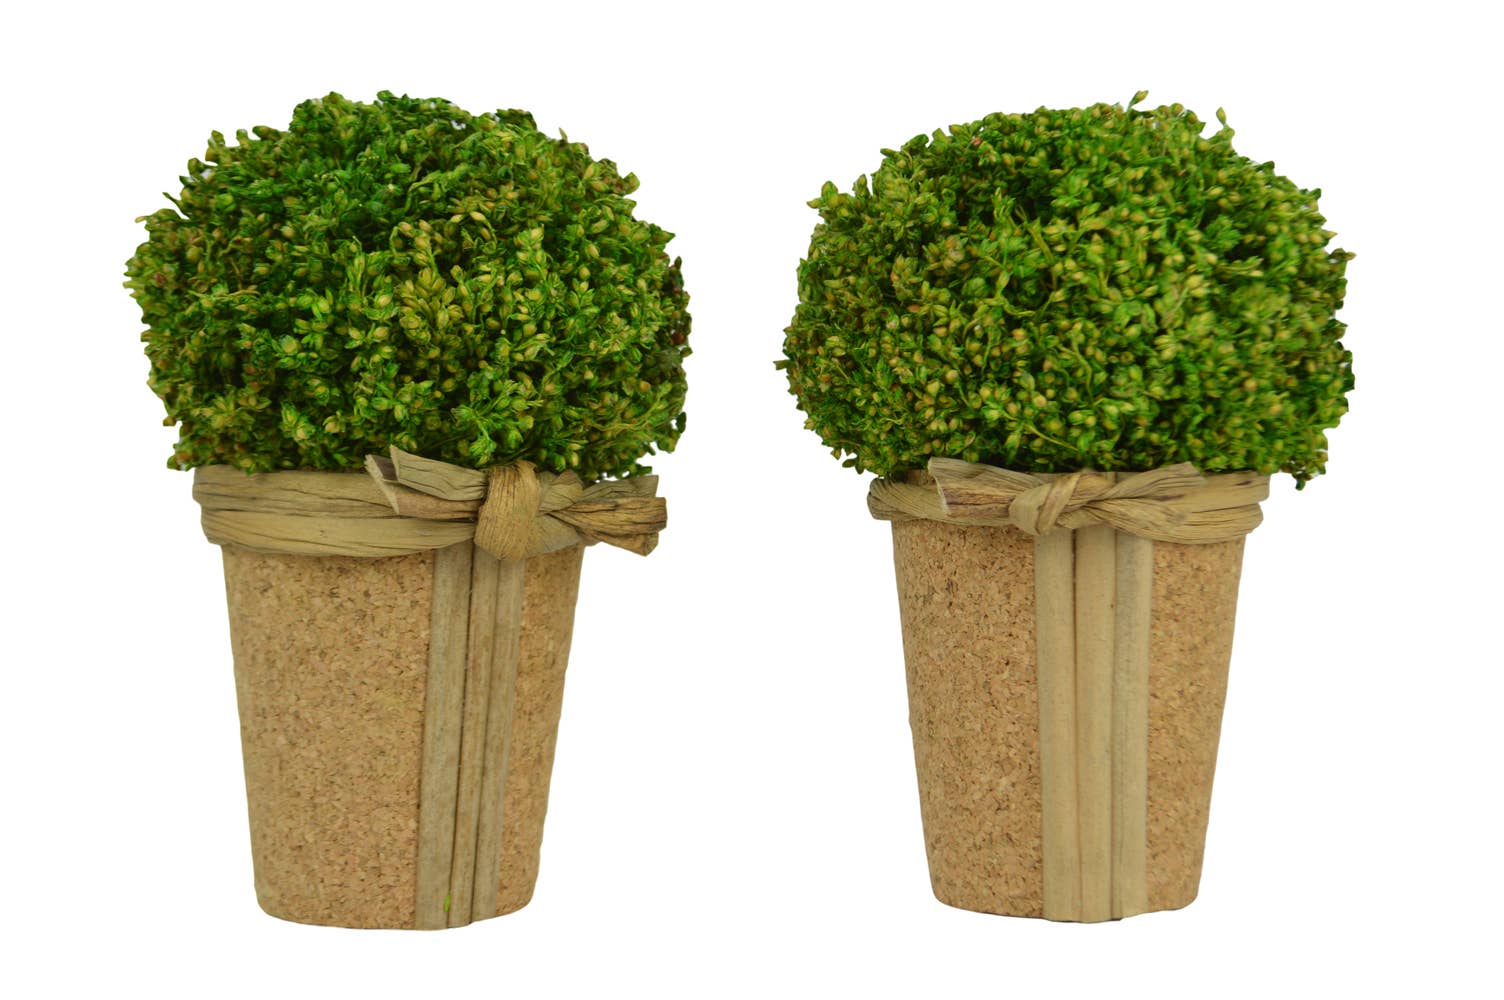 Galt International Company - Preserved Natural Grass Topiary In Pot (Set of 2) (7798947971299)